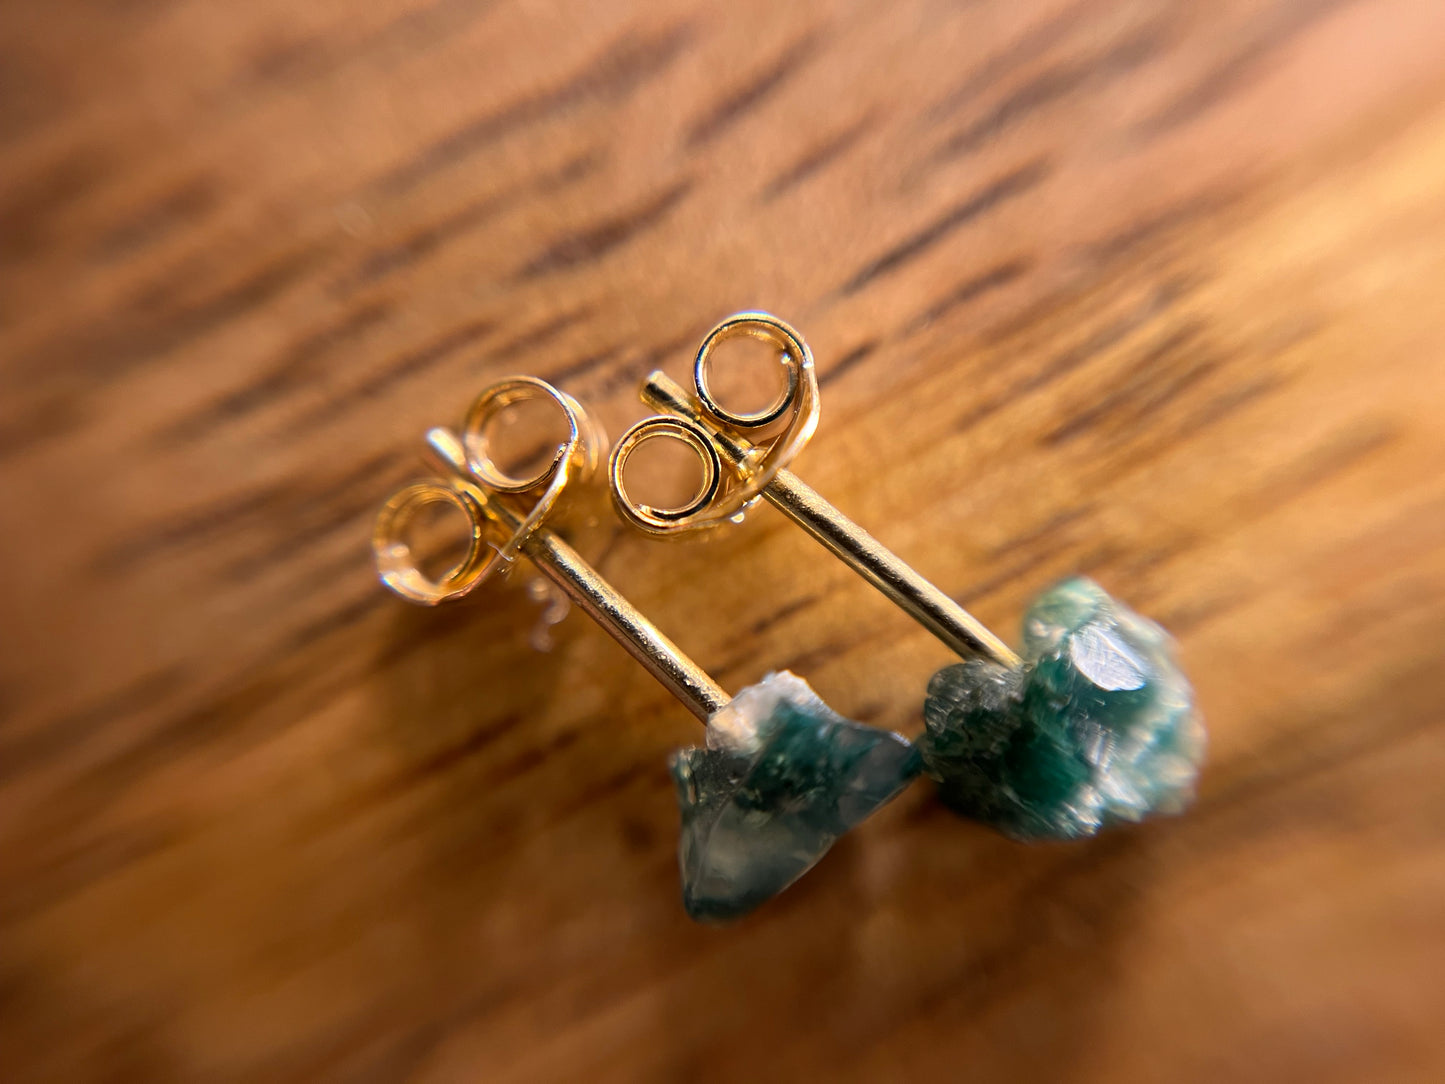 9ct or 18ct Gold Moss Agate Stud Earrings, Natural Moss Agate Earrings, Raw Crystal Earrings, Raw Moss Agate Jewellery, Minimalist Earring Studs (Tumbled)